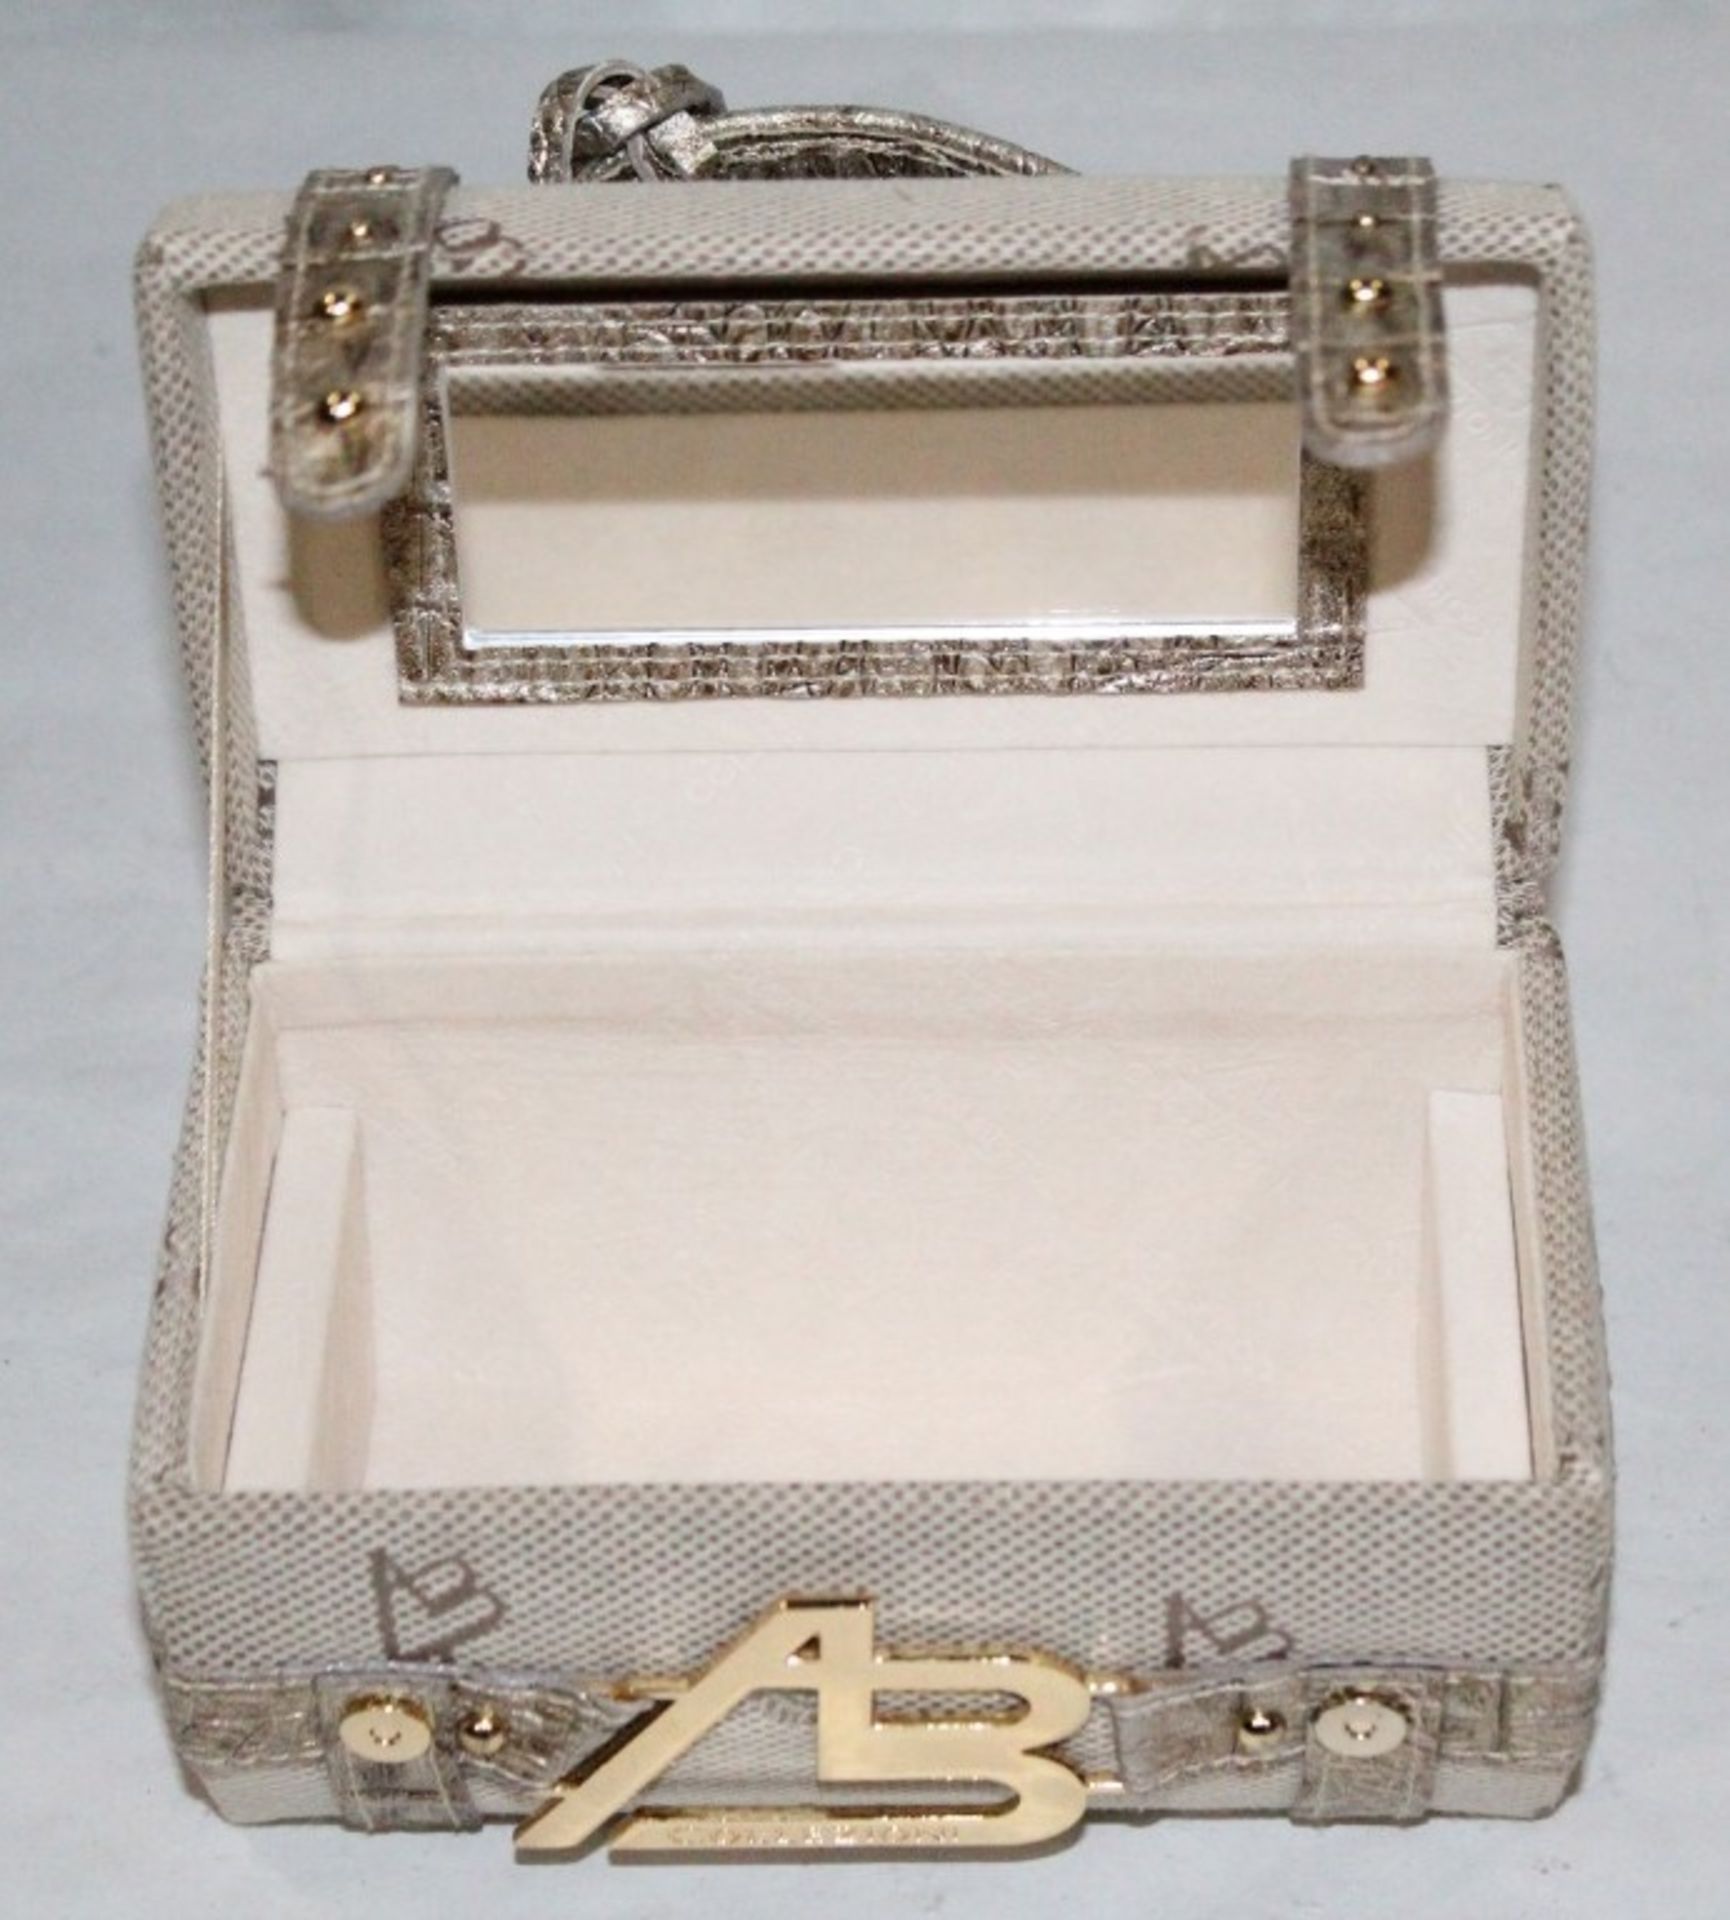 1 x "AB Collezioni" Italian Luxury Jewellery Box (30533) - Ref LT134 – Features A Pull-Out - Image 4 of 5